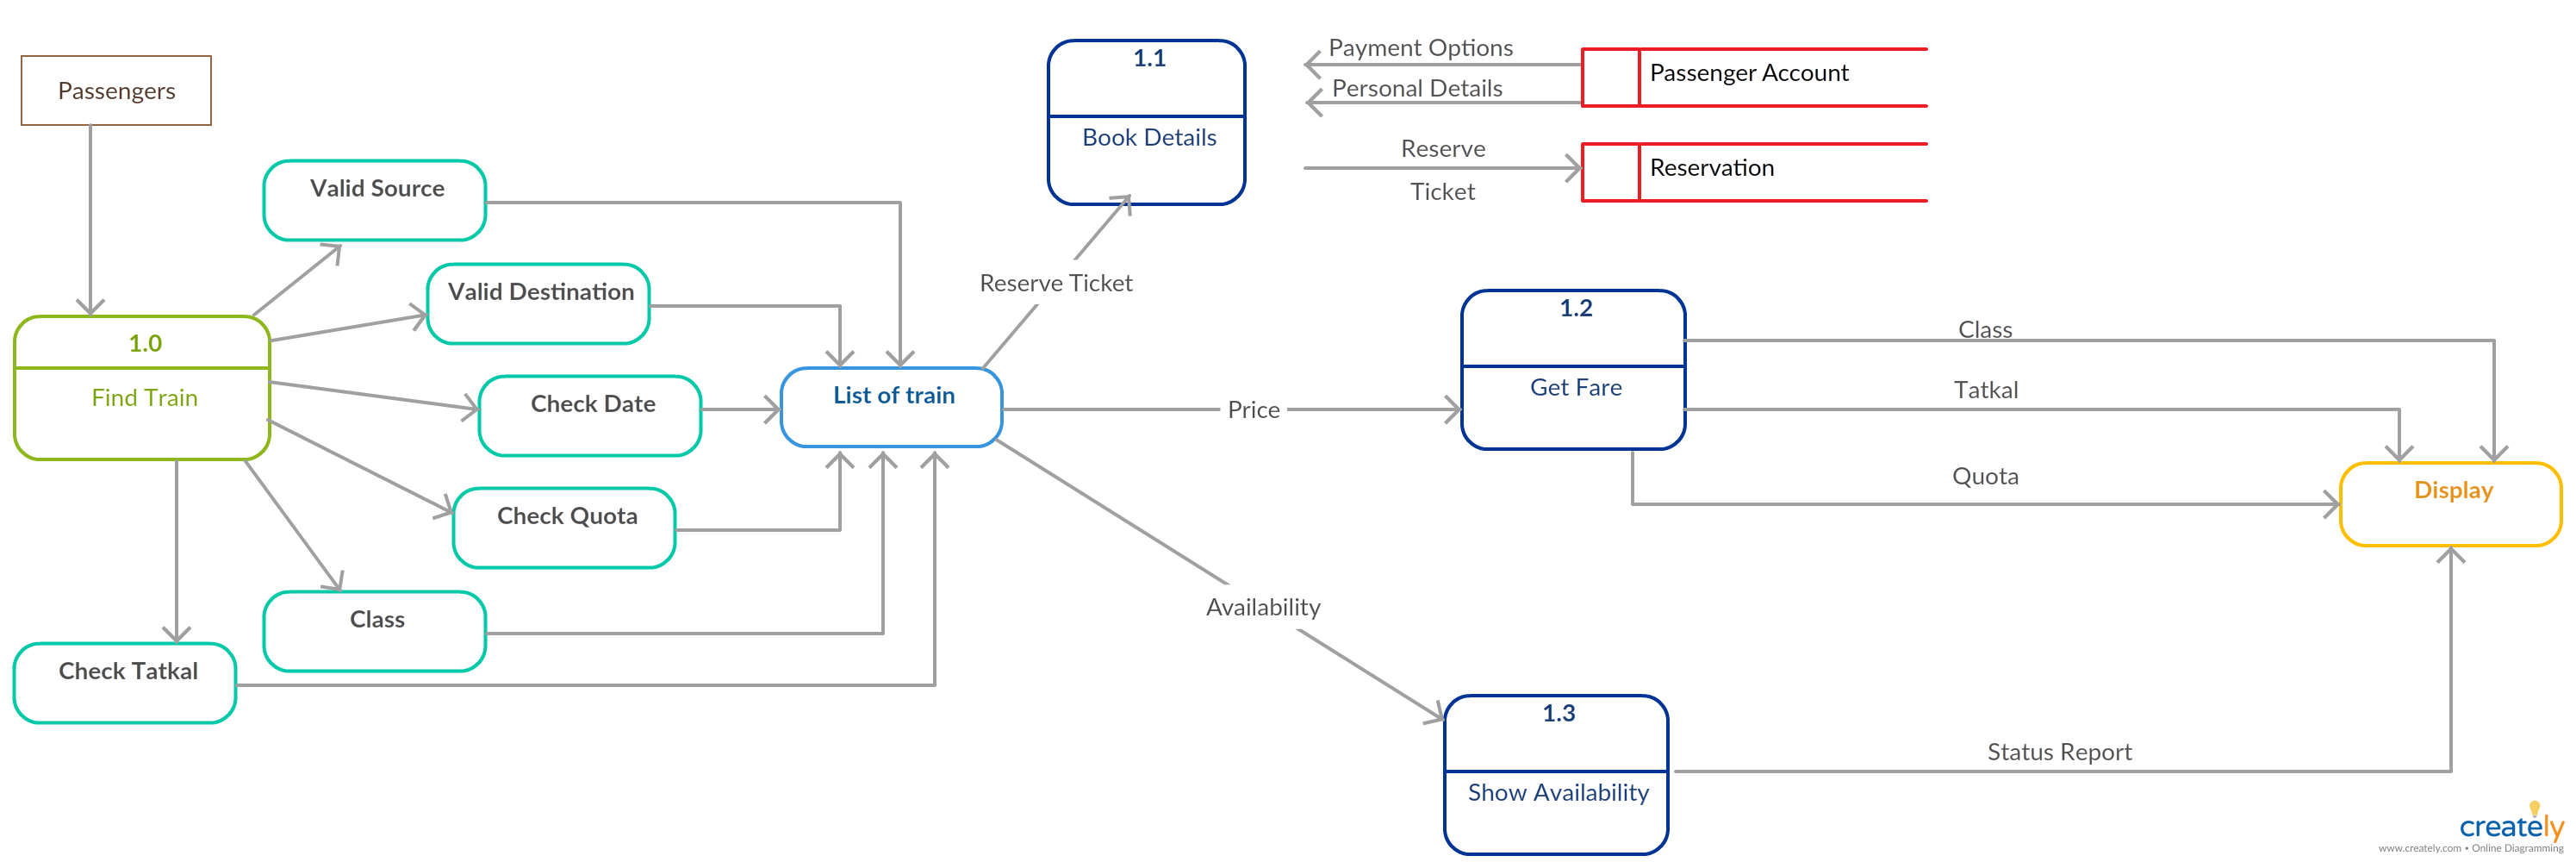 Pin On Data Flow Diagram Examples